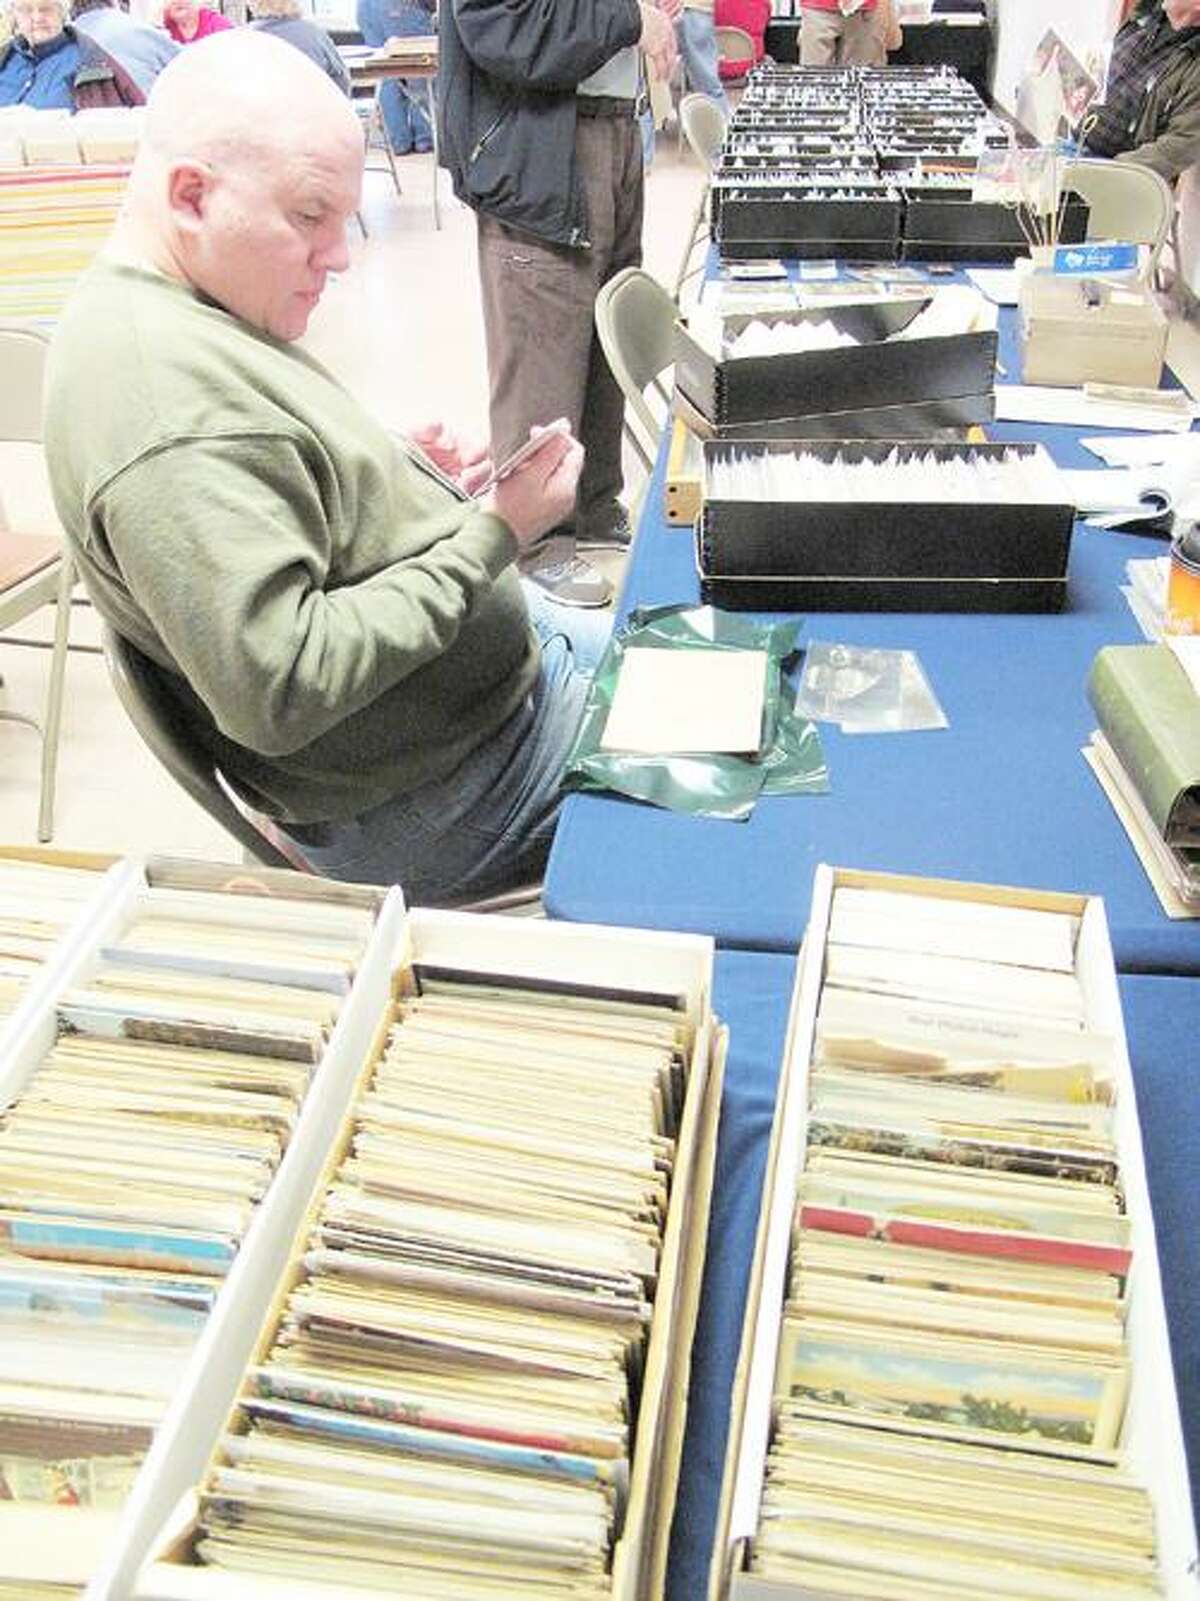 Photo by JOHN HAEGER (Twitter.com/OneidaPhoto) Tom Gates of Ava looks for postcards of the Adirondacks during the 28th annual spring Post Card Show and Sale at St. Paul's United Methodist Church on Saturday, March 31, 2012.